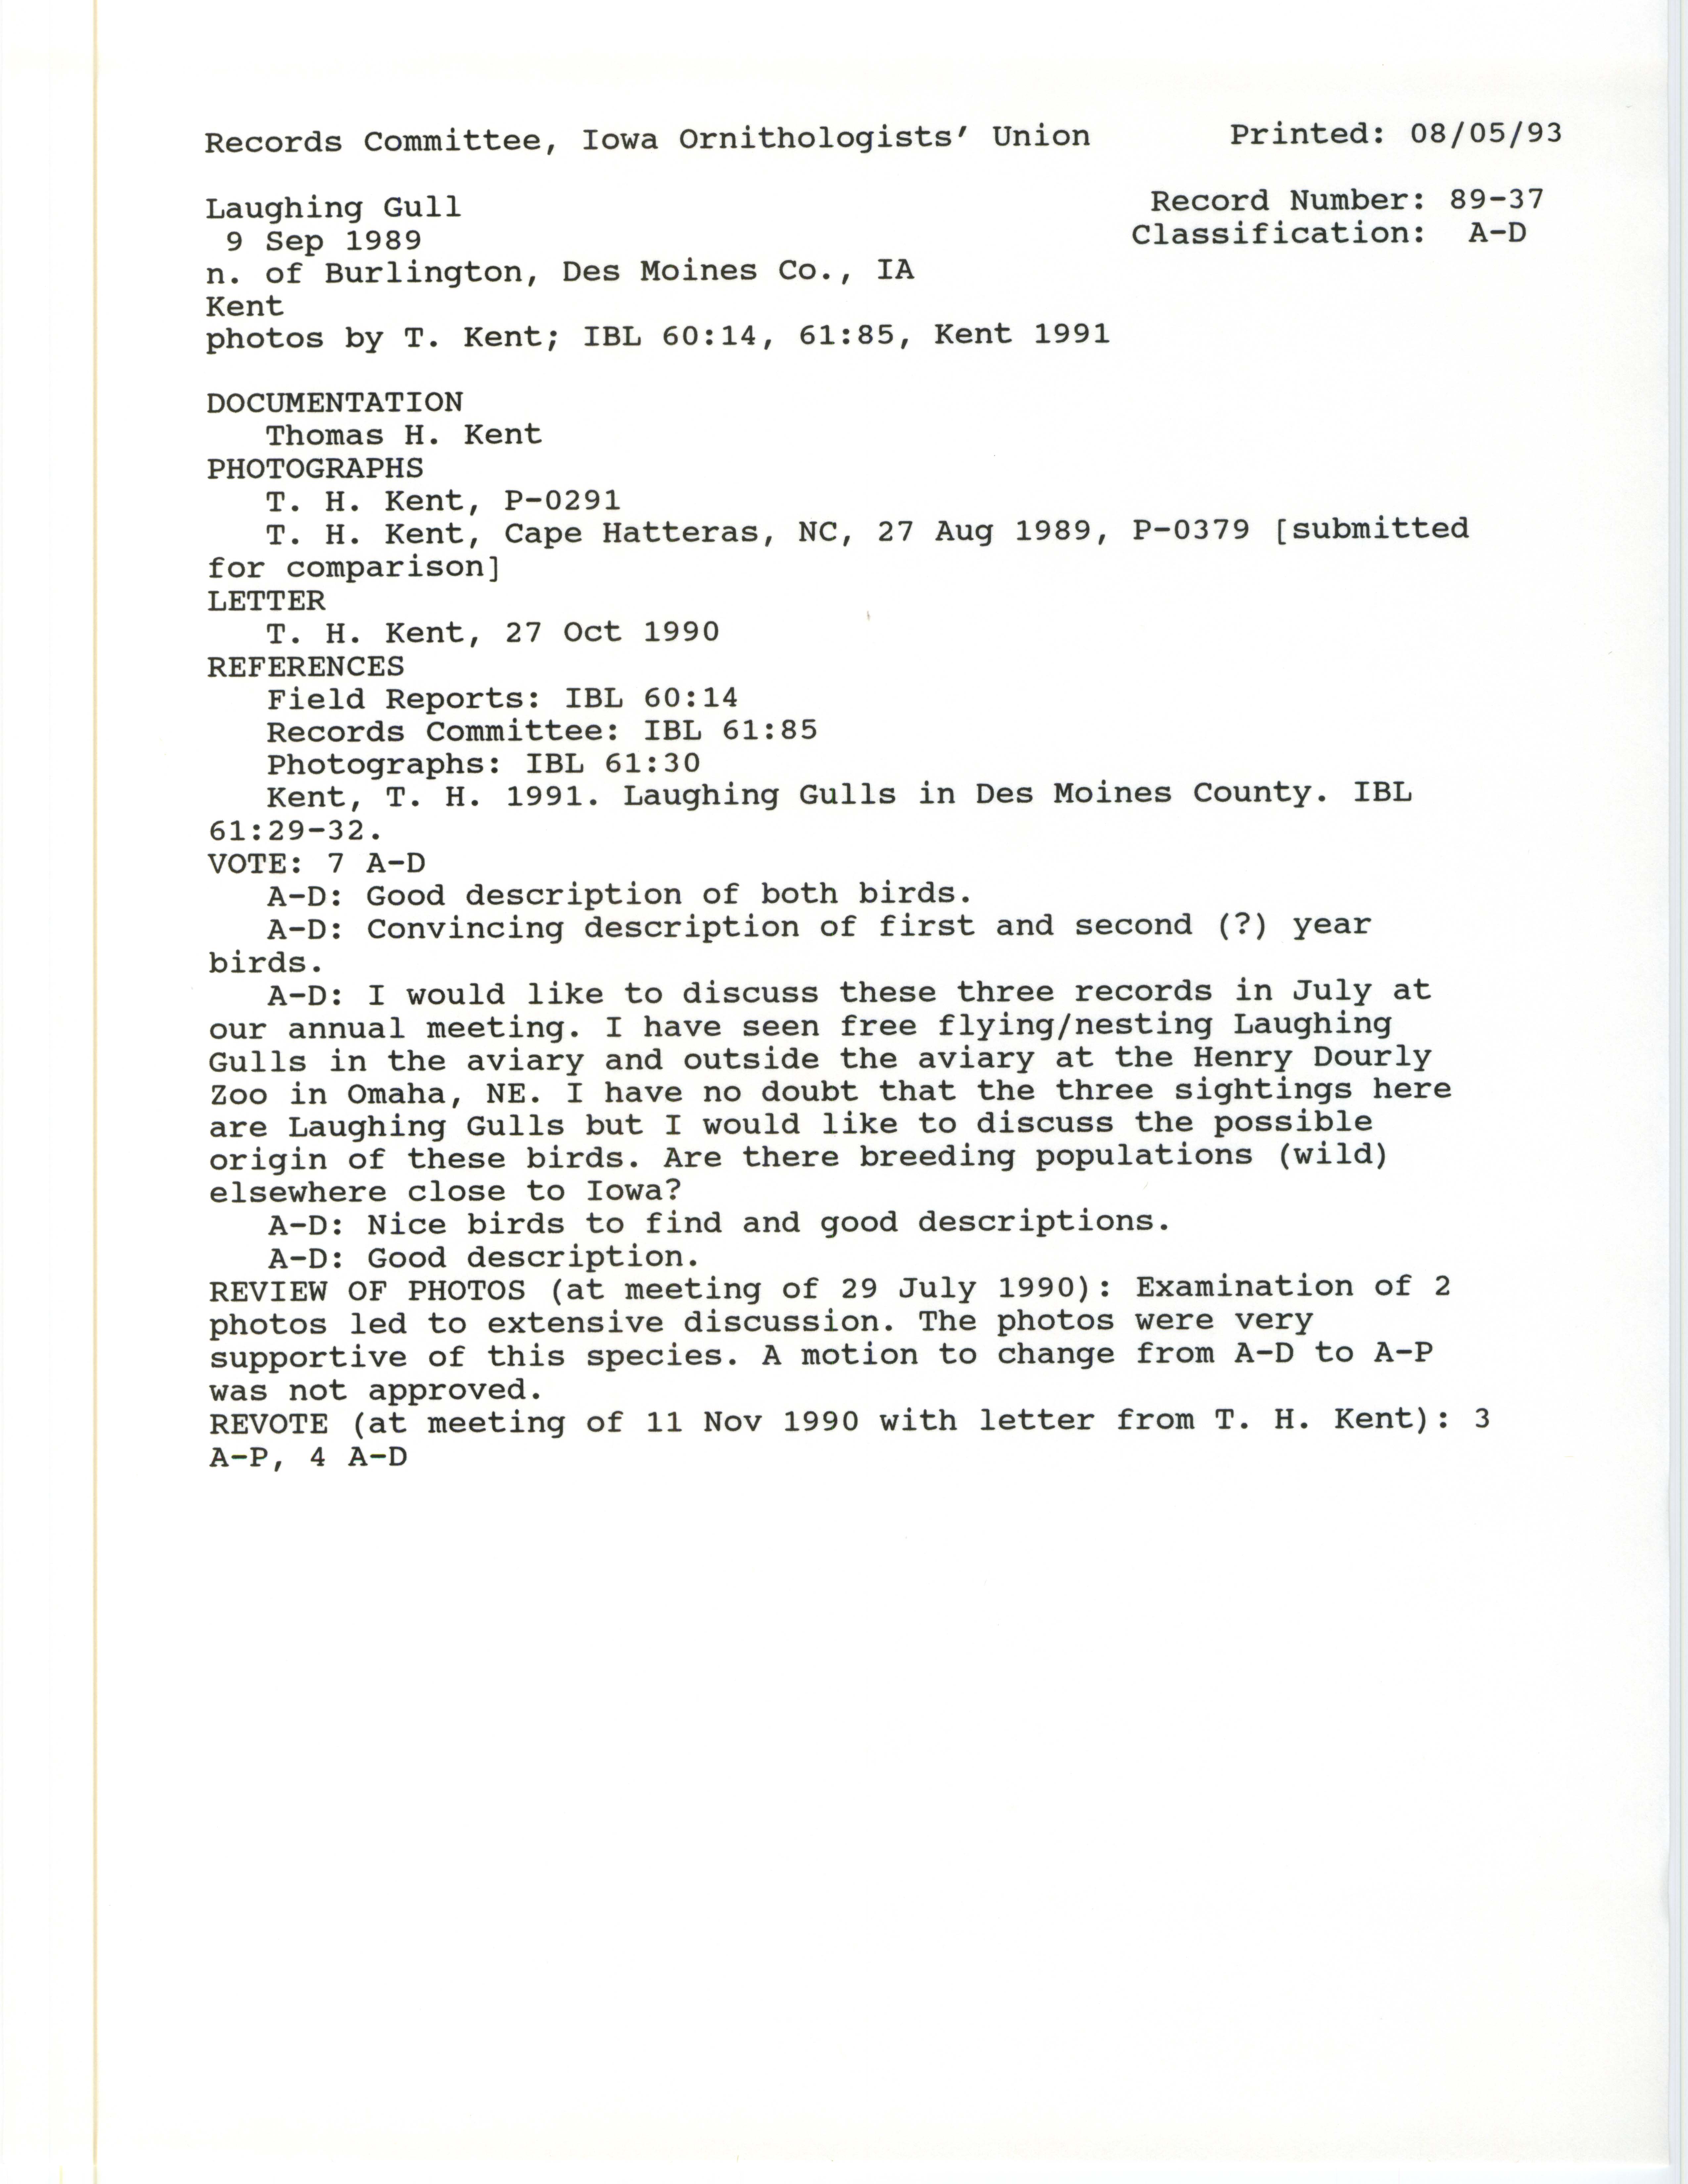 Records Committee review for rare bird sighting for Laughing Gull at Mississippi River Pool 18 in Des Moines County, 1989